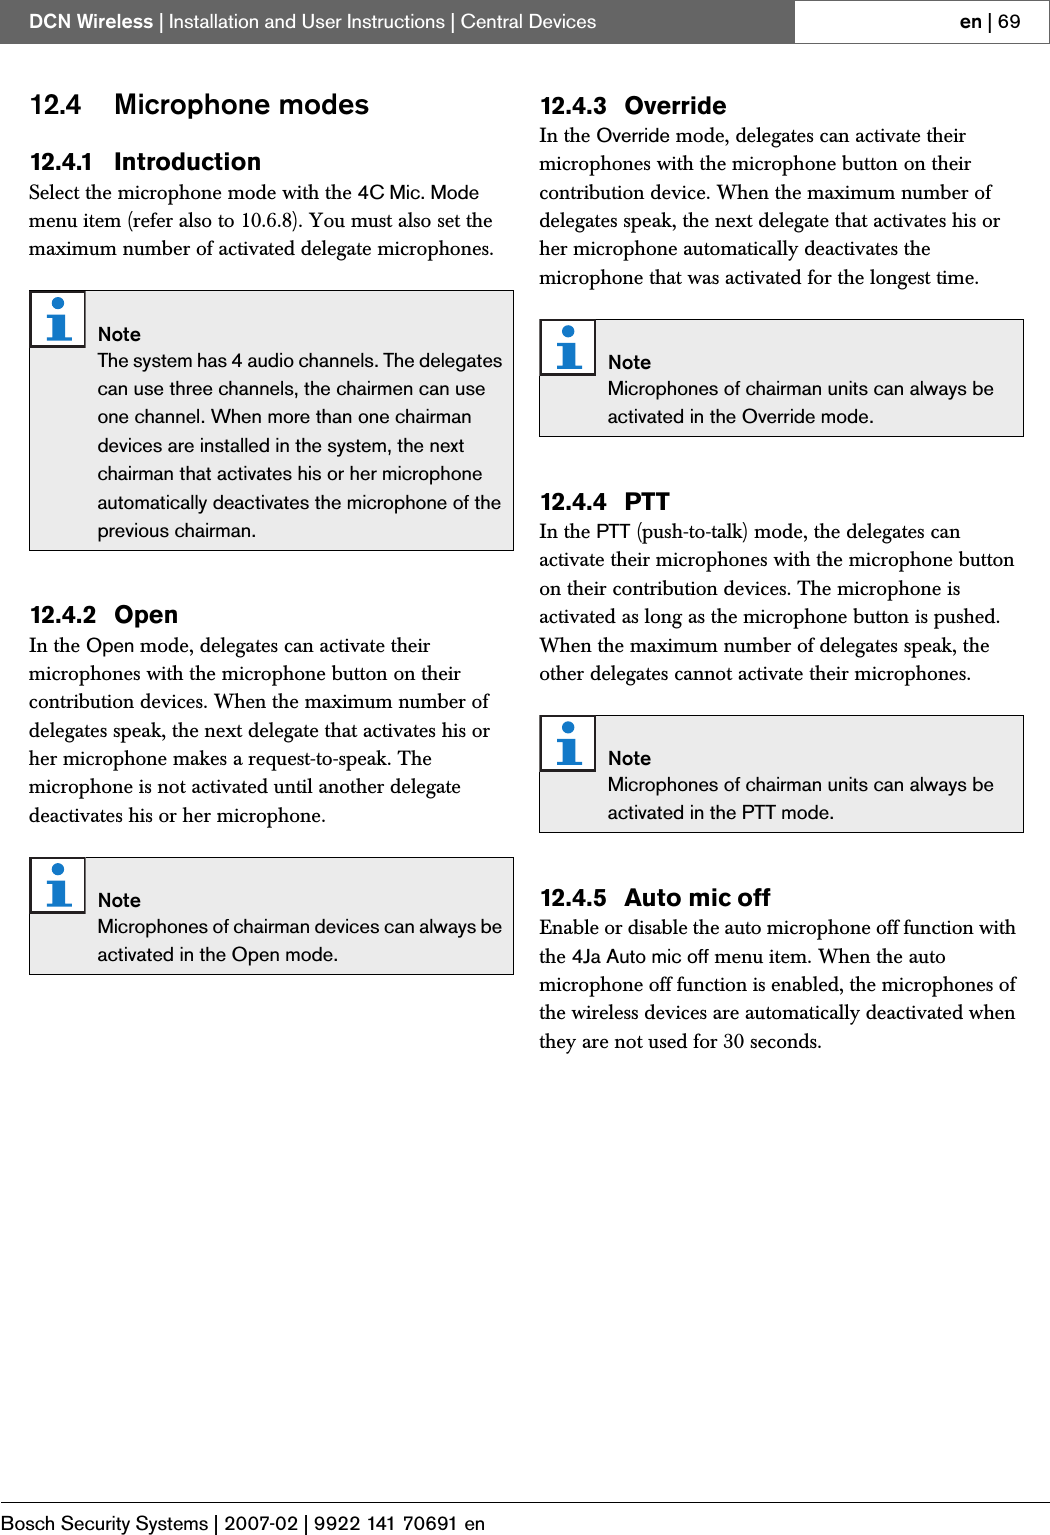 Page 40 of Bosch Security Systems DCNWAP Wireless Access Point User Manual Part 2